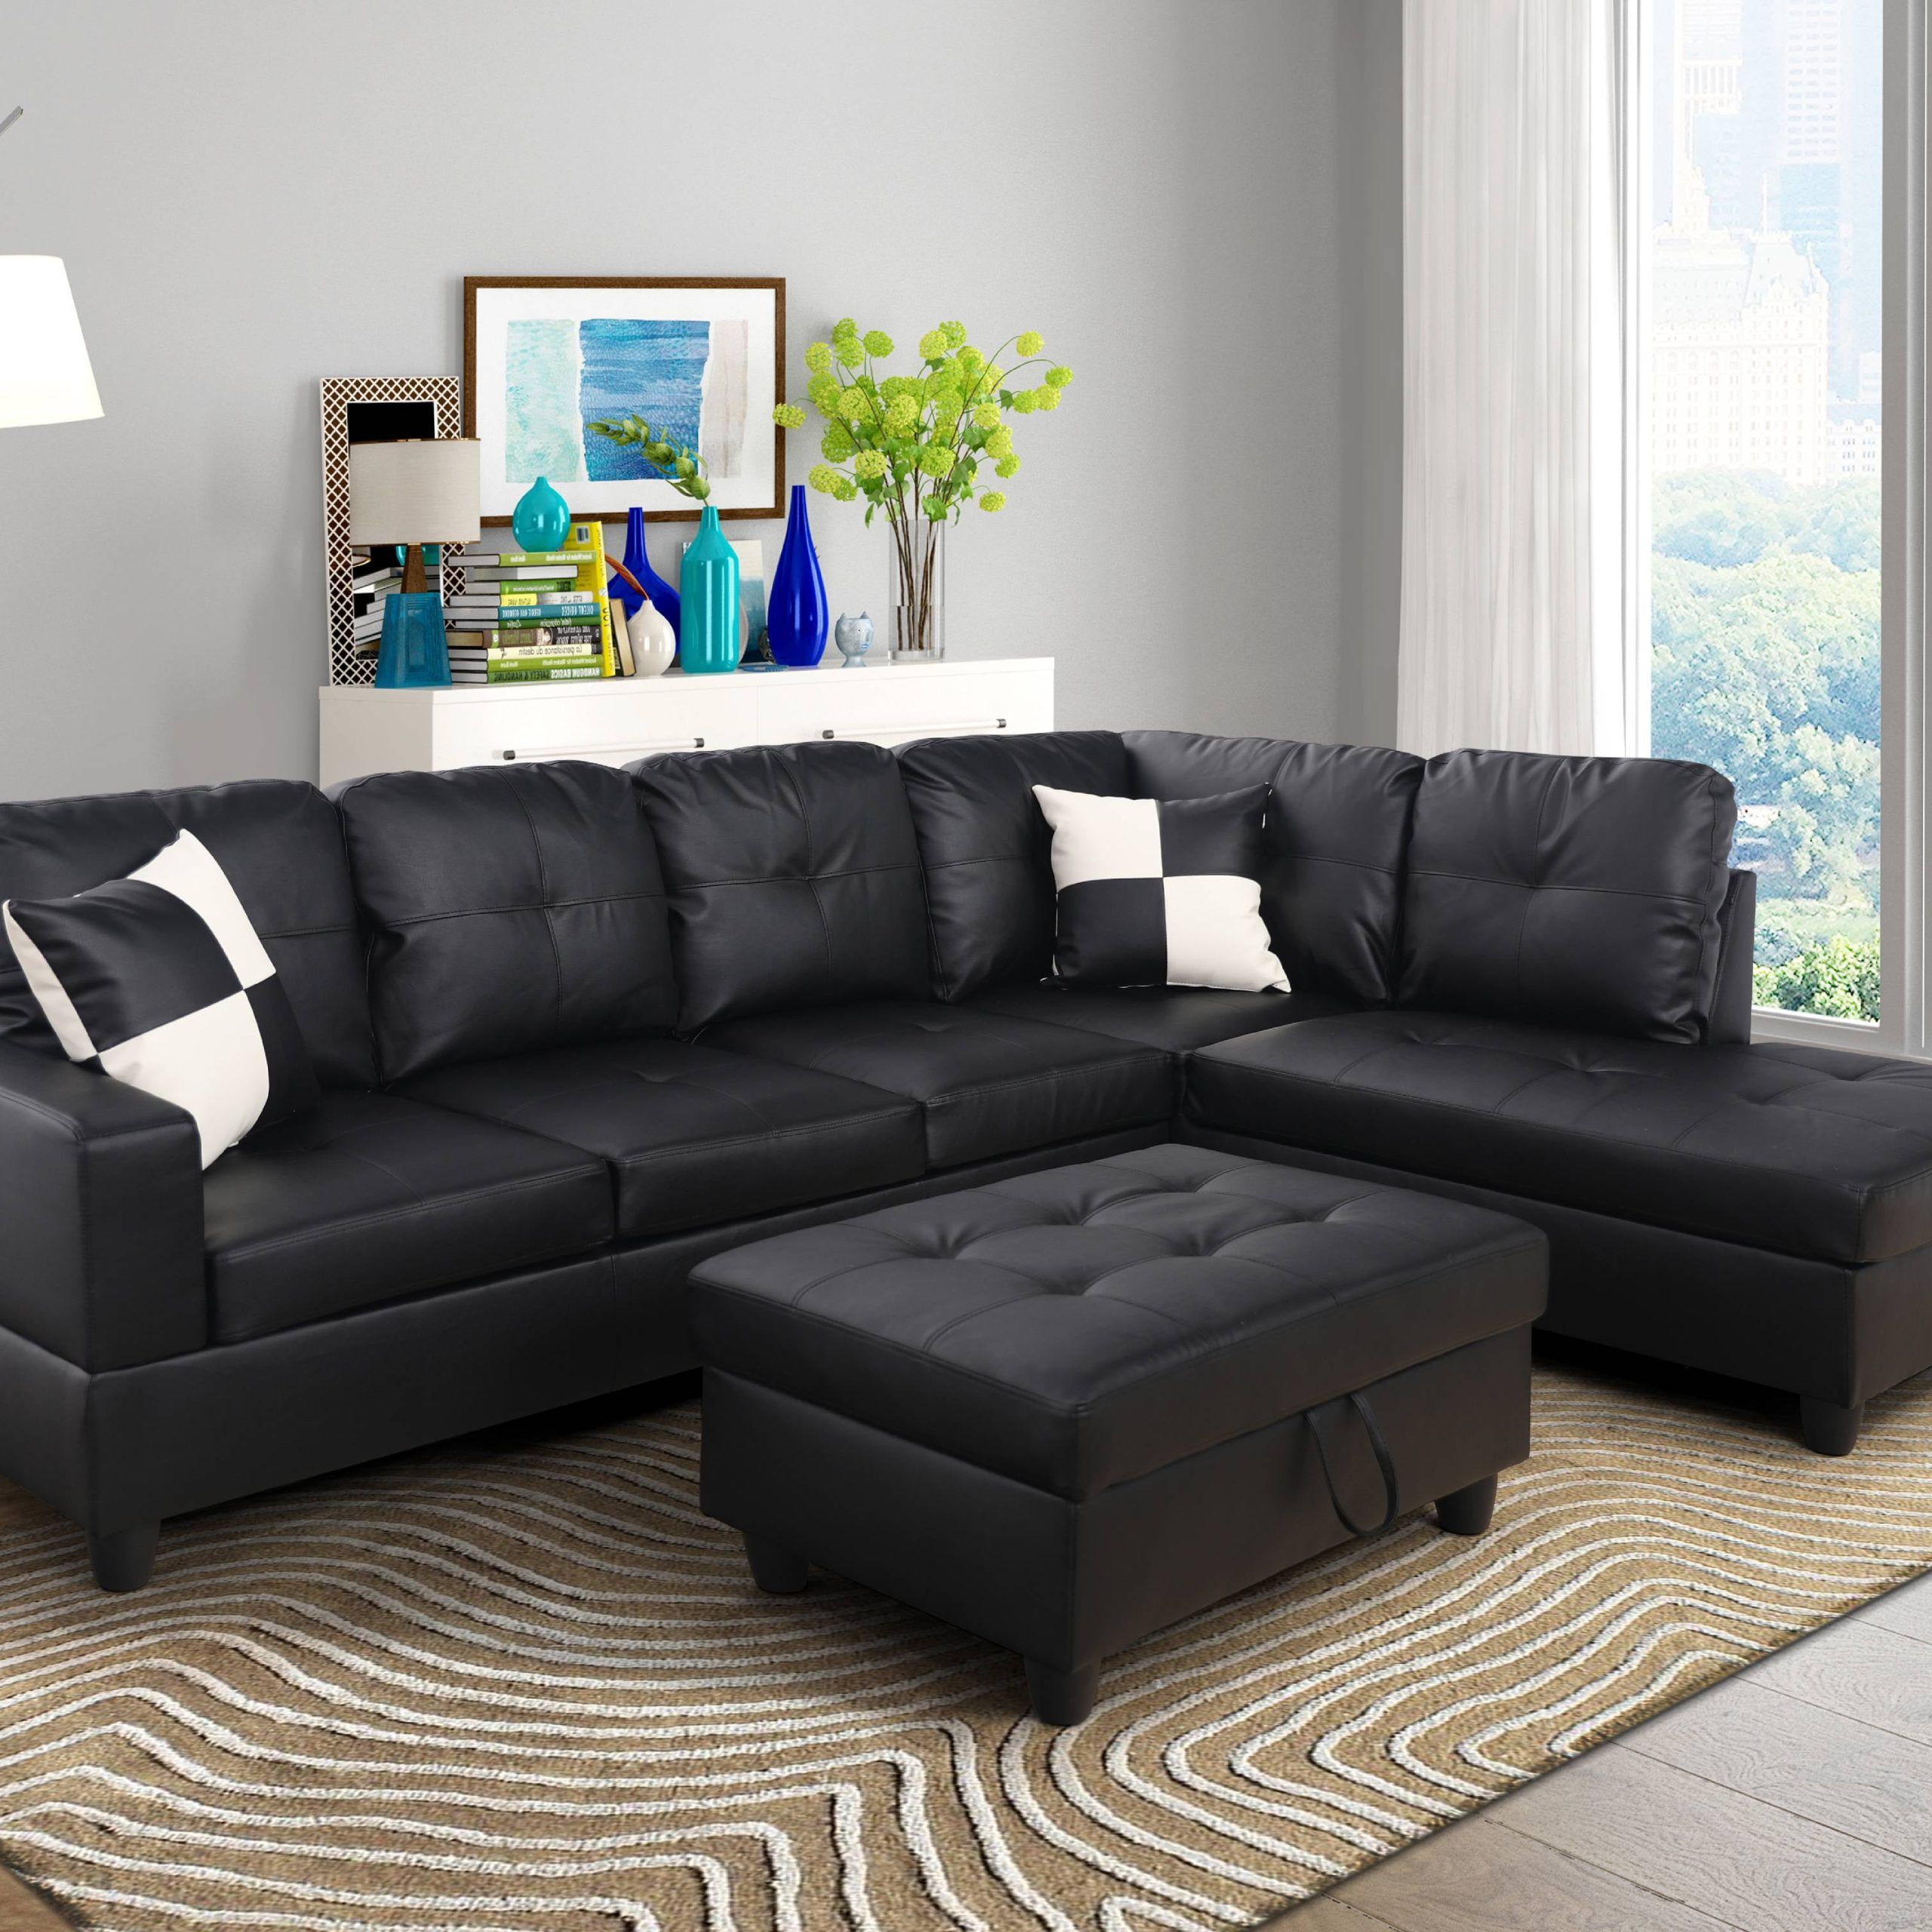 Aycp Furniture L Shape Sectional Sofa With Ottoman, Left Chaise, Black Intended For Sofas With Ottomans (View 14 of 20)